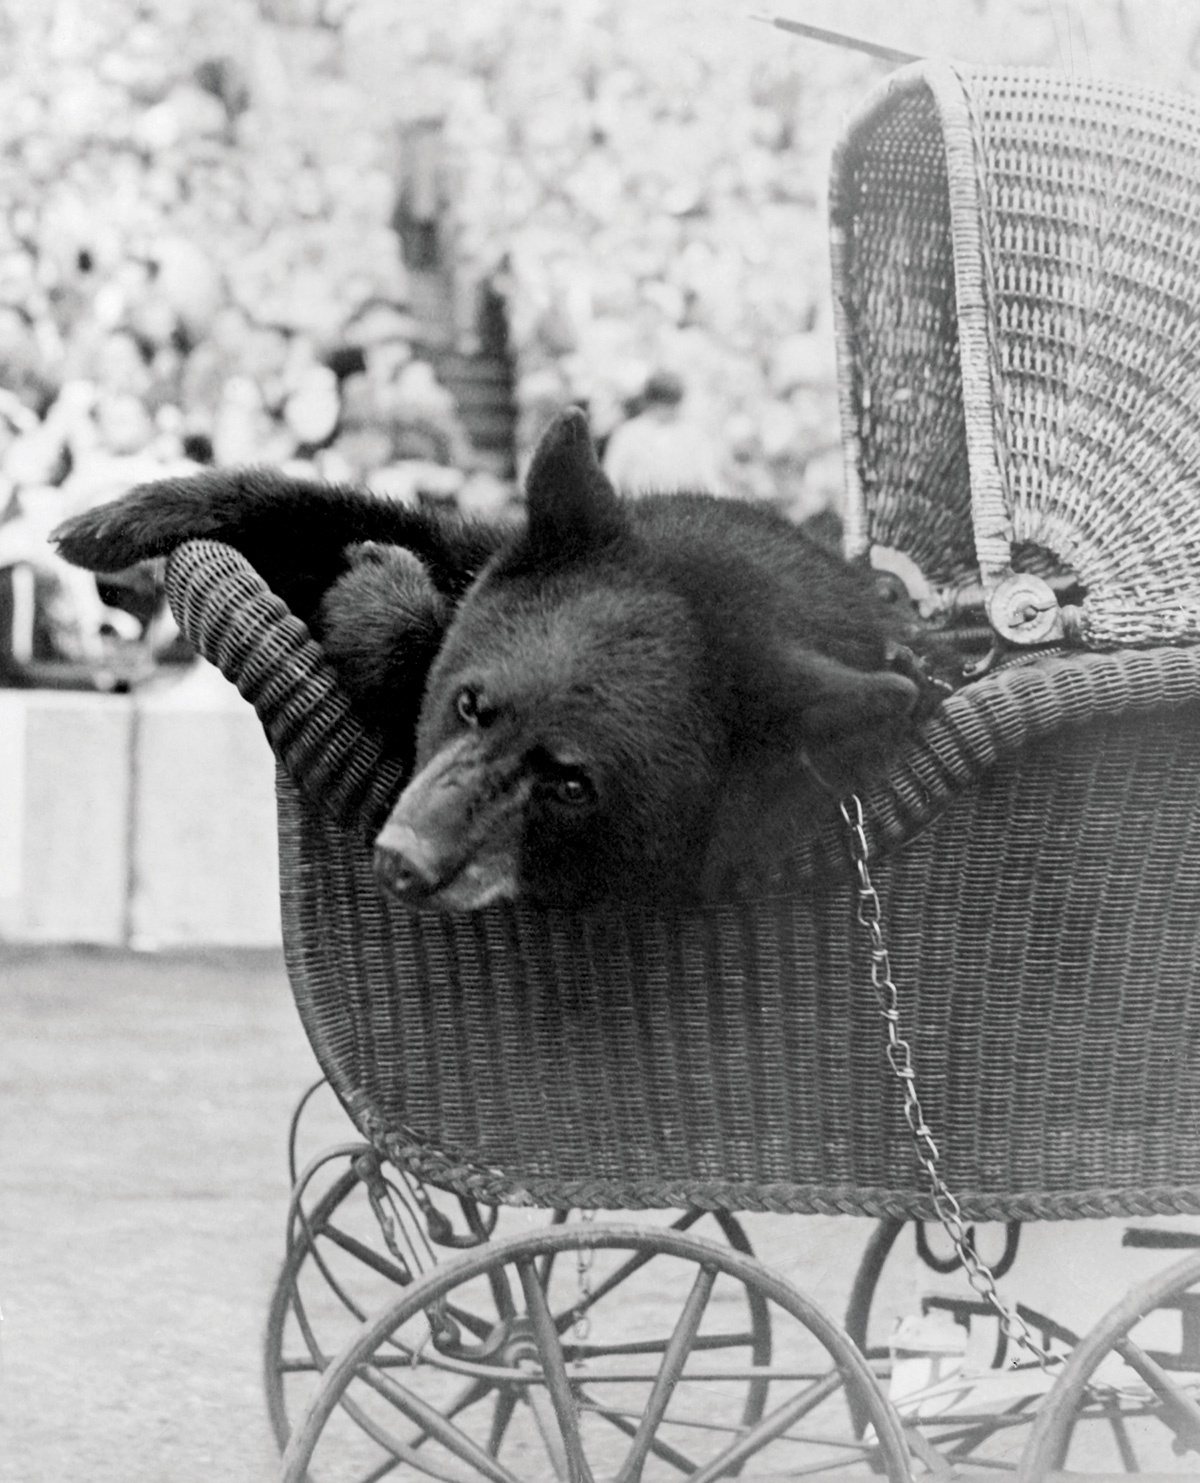 A vintage photograph of a bear in a baby carriage, from 1948.